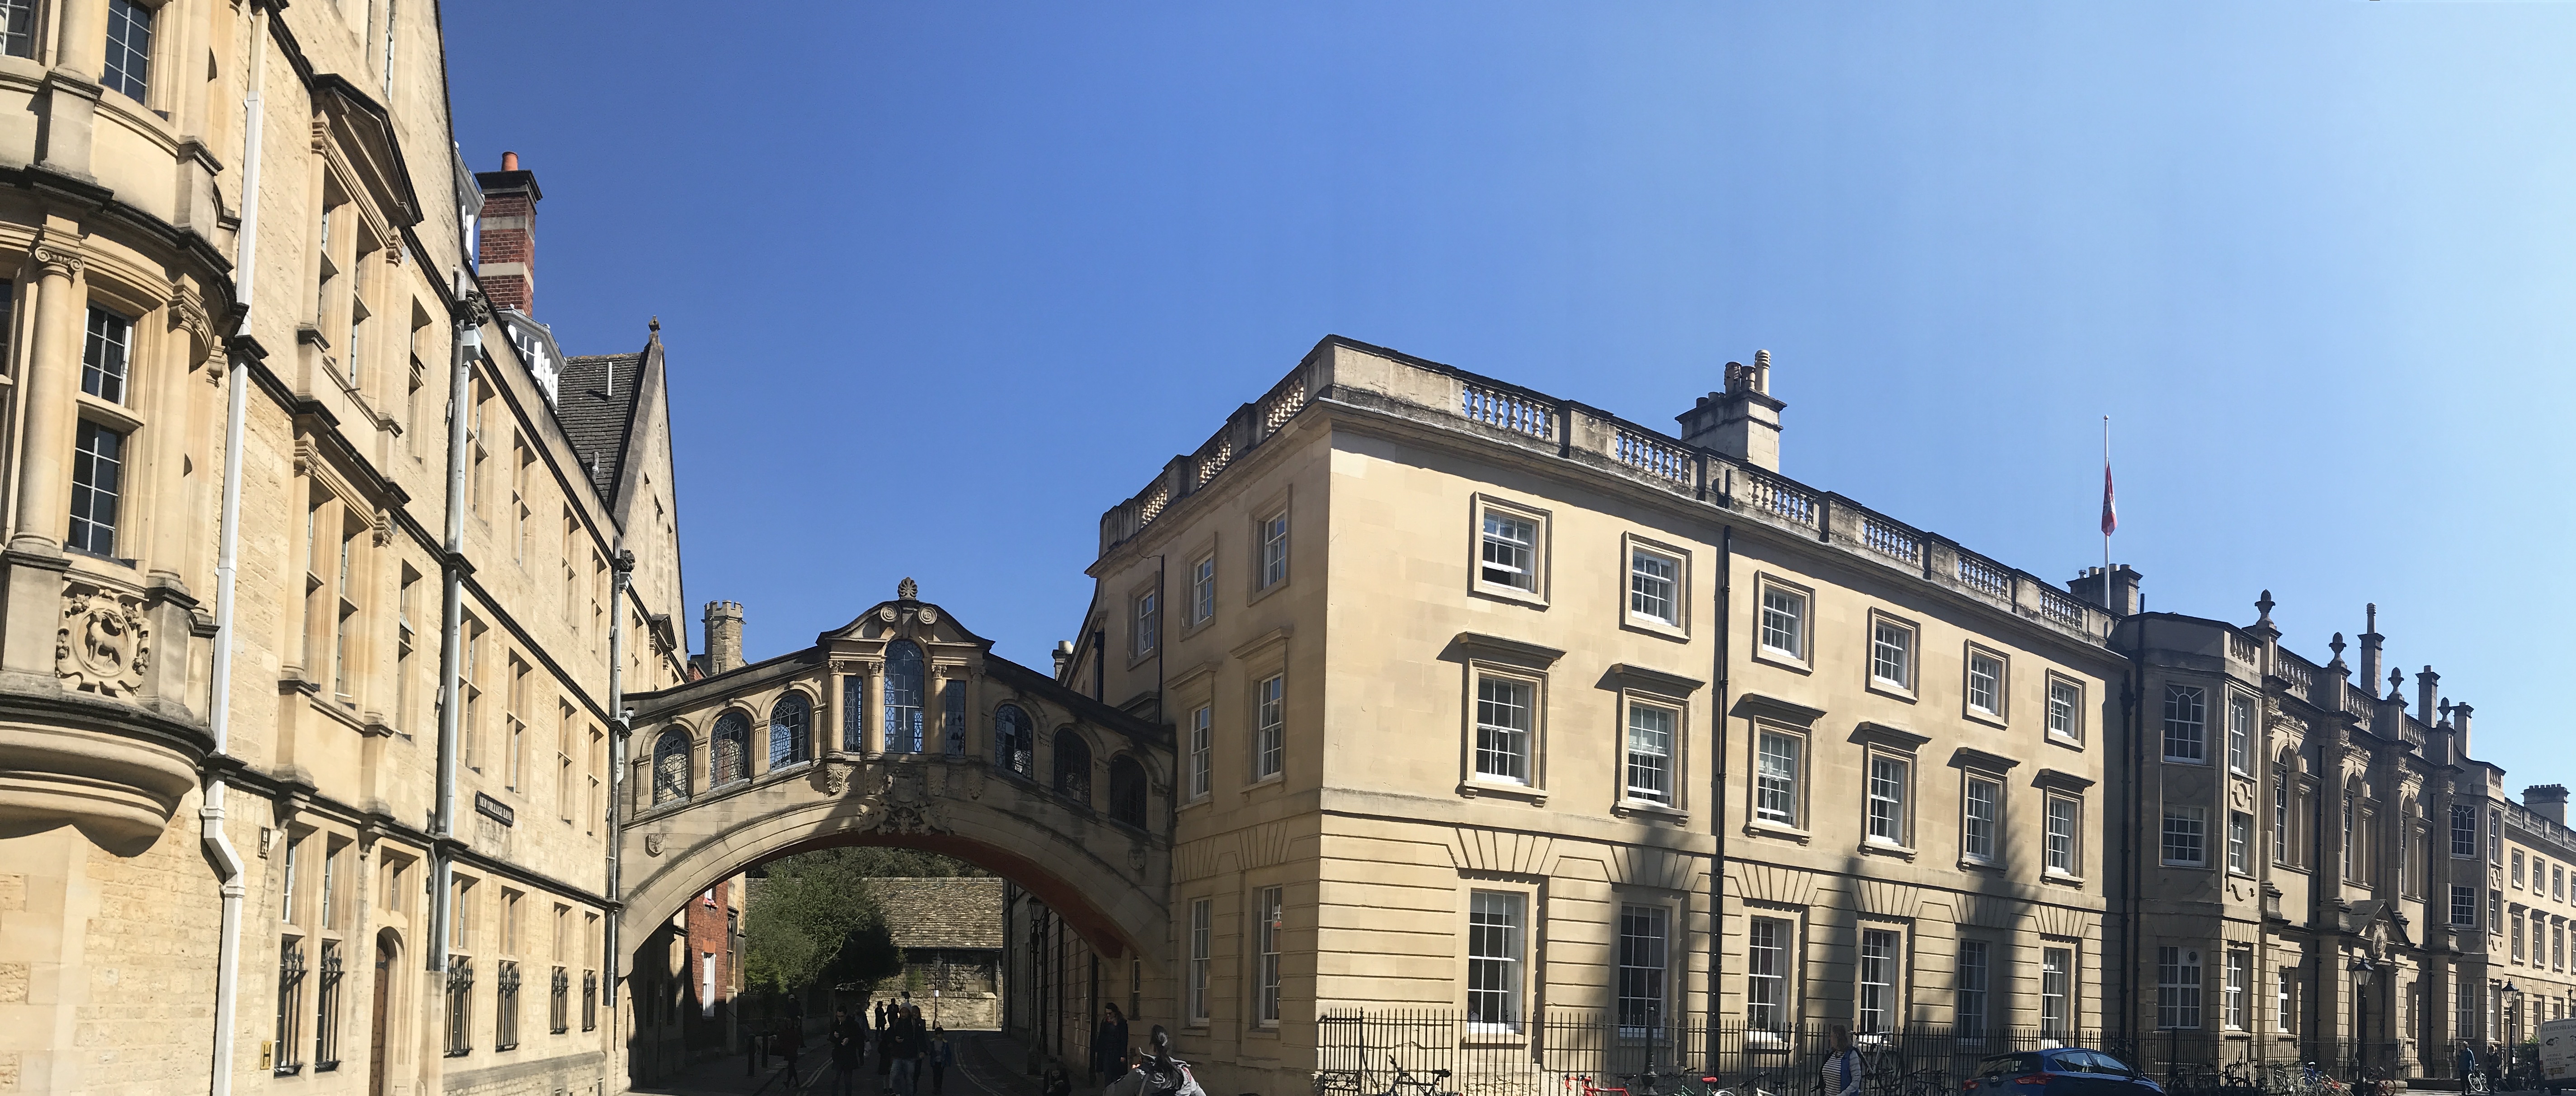 Hertford College with 'Bridge of Sighs'